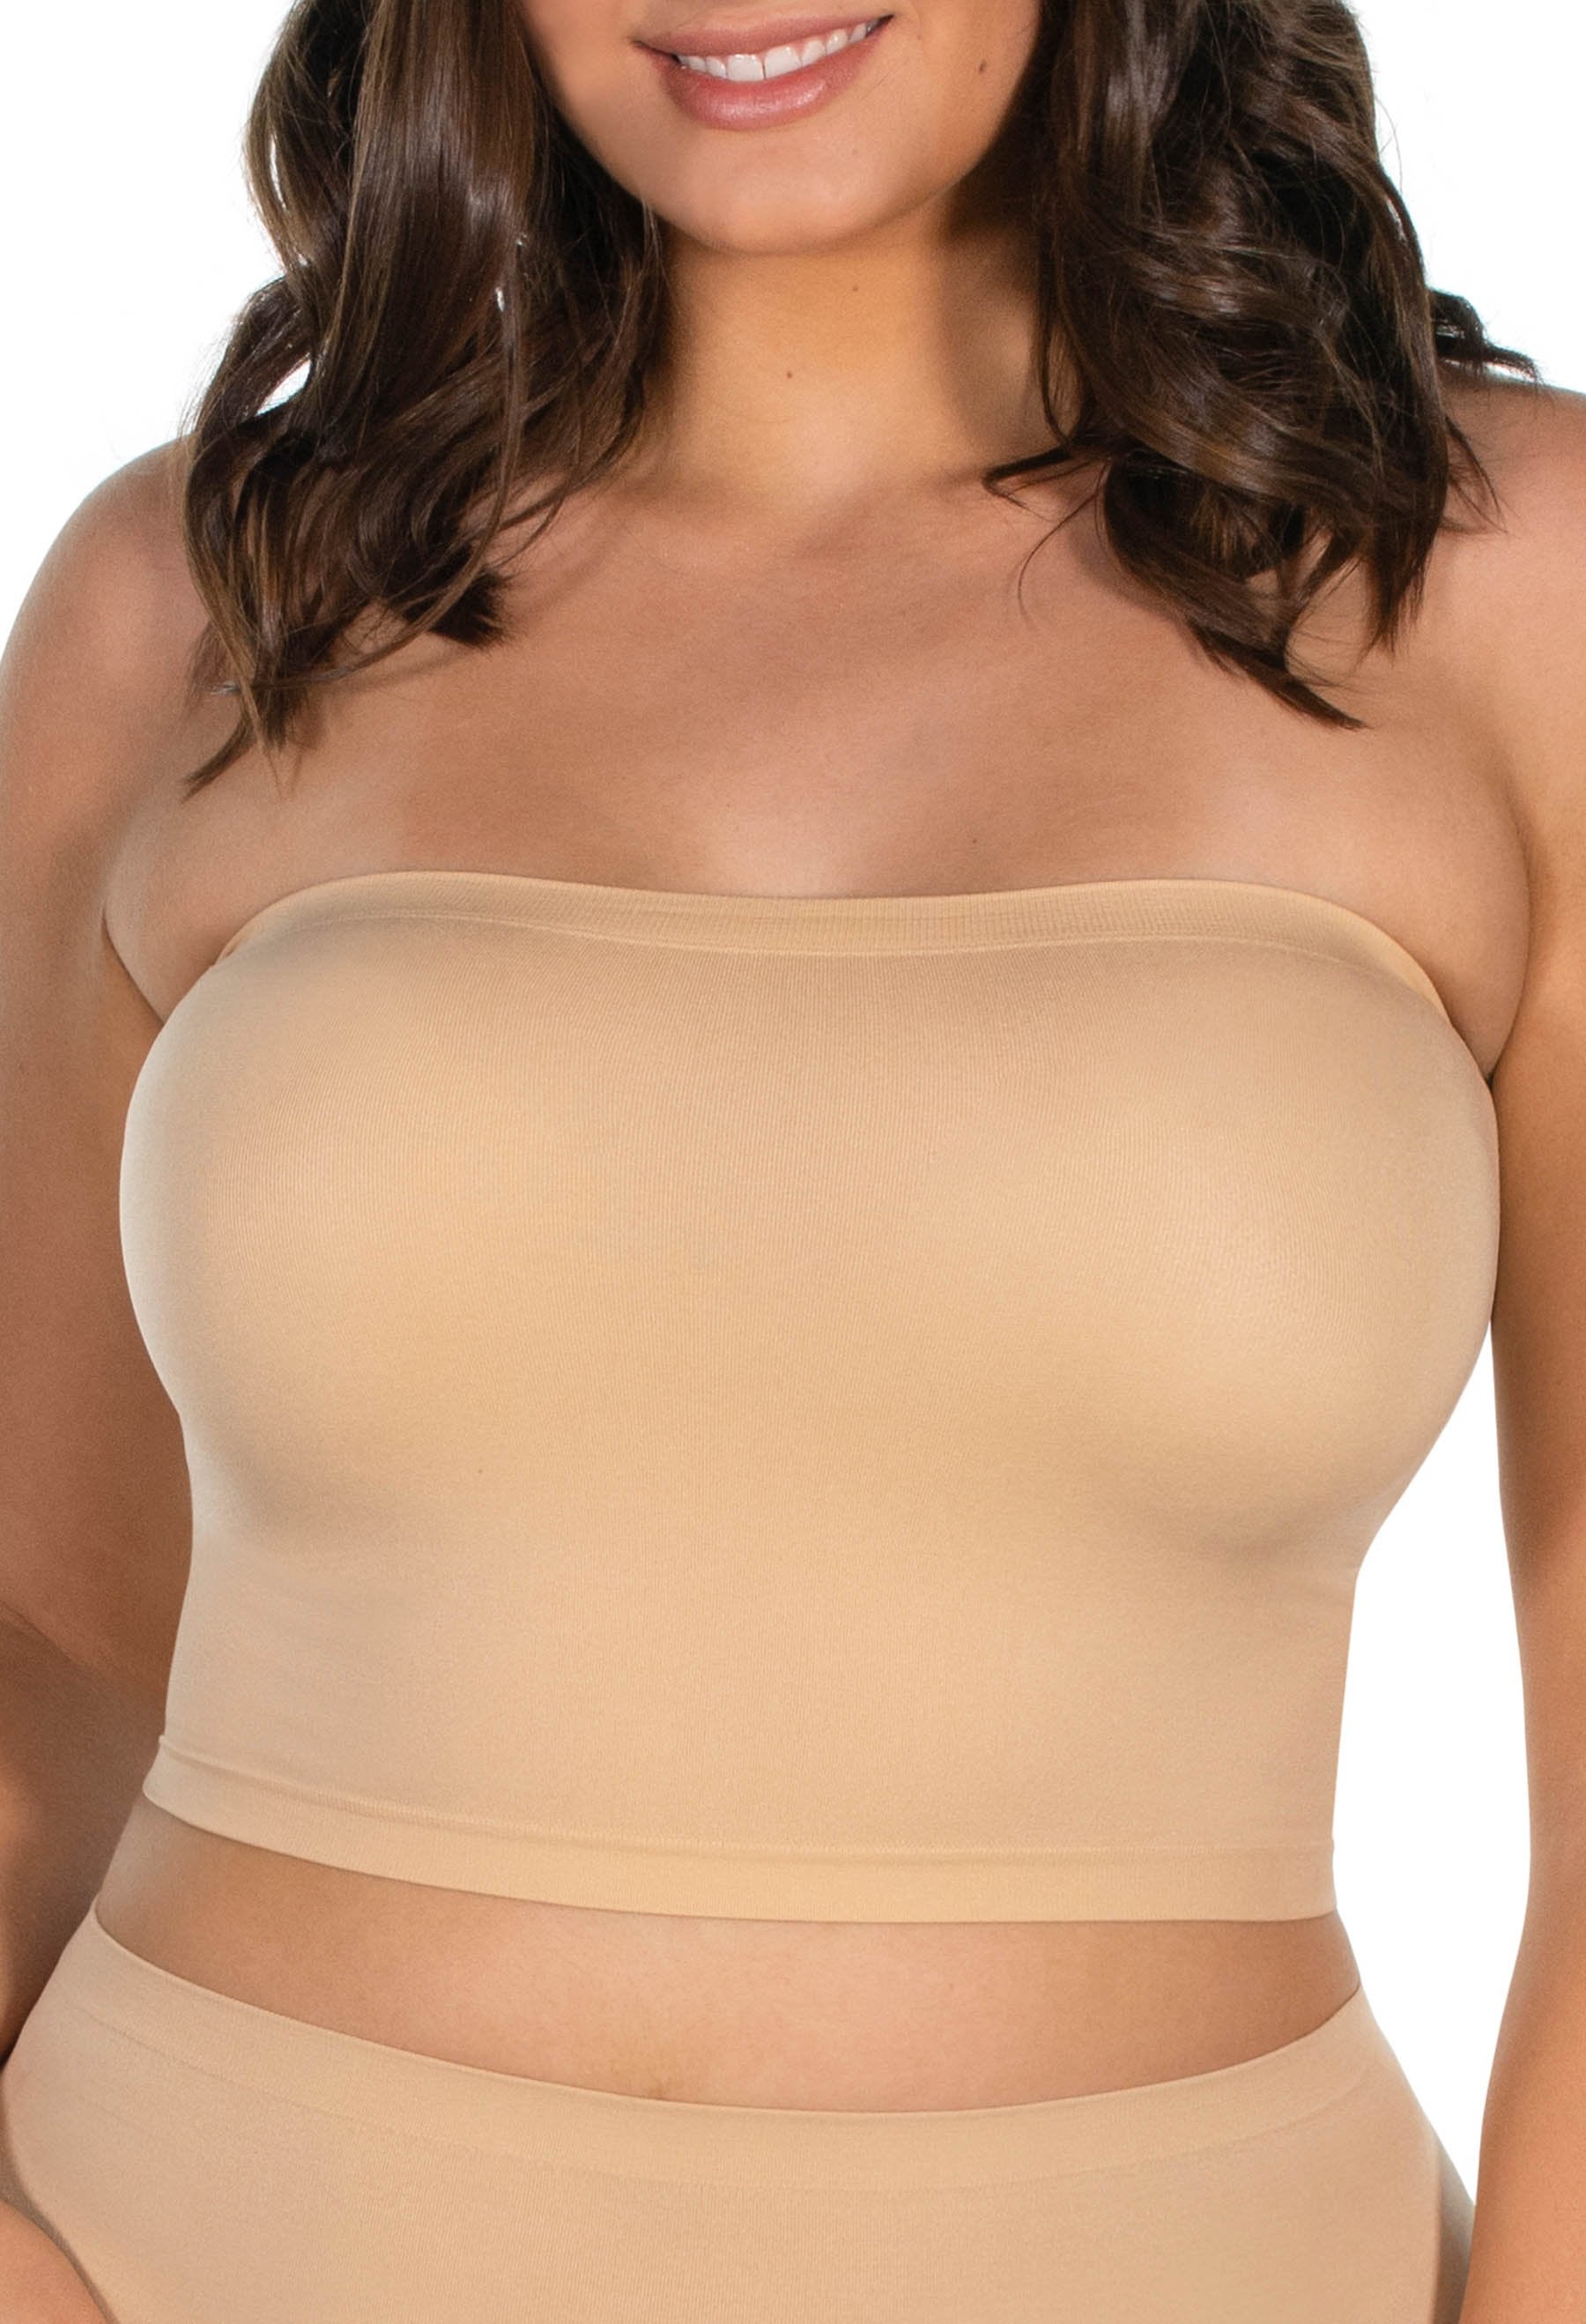 1 Pc Womens Plus Size Tube Top Bra Strapless Bandeau One Size Fits Most  Beige